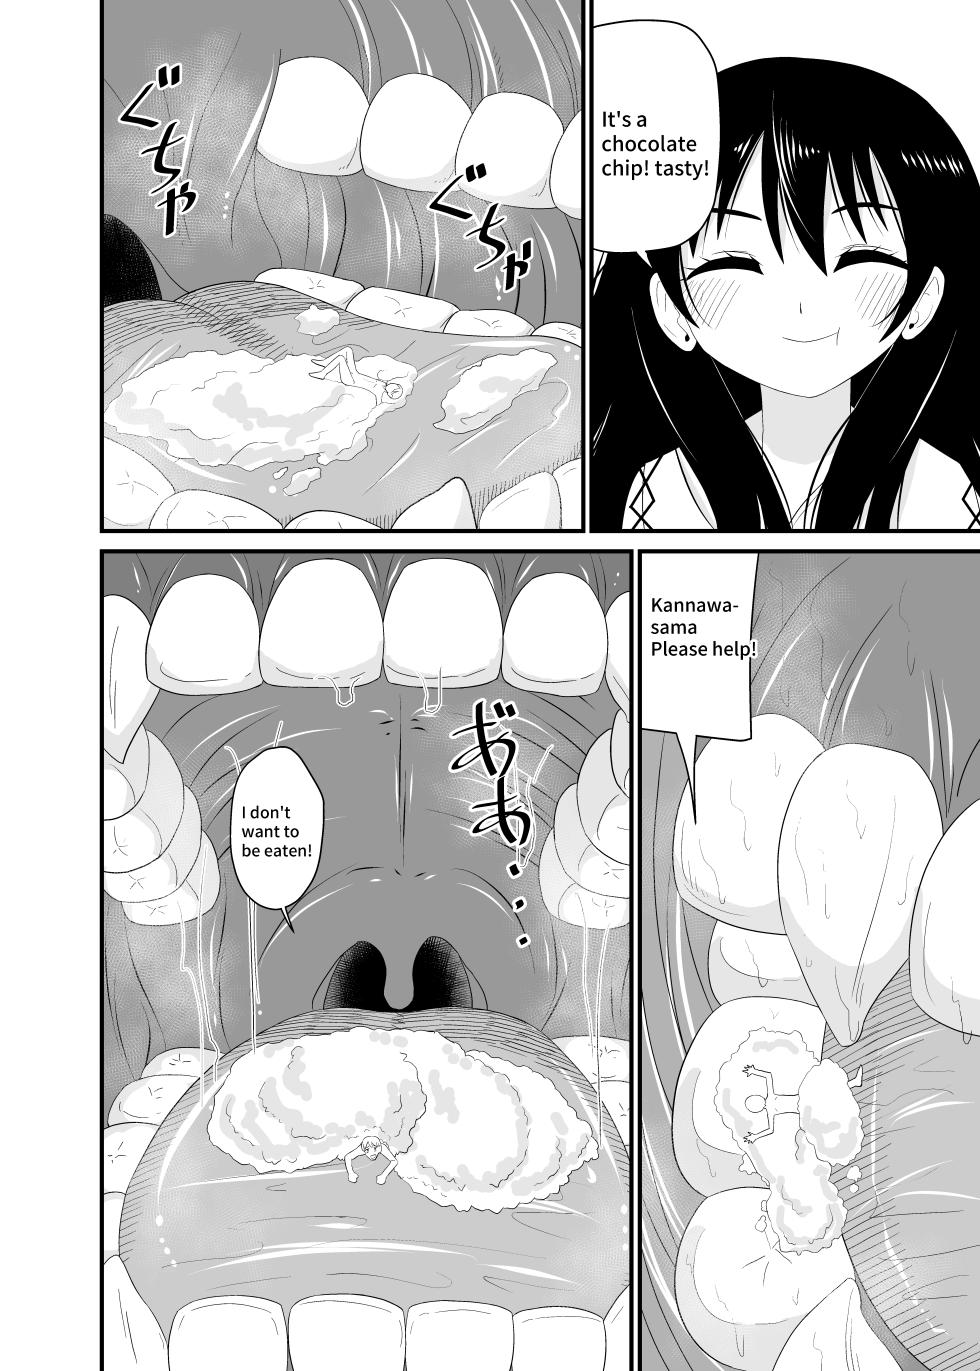 [Shivharu] Eat without being noticed by loli babaa 3 [English] - Page 9